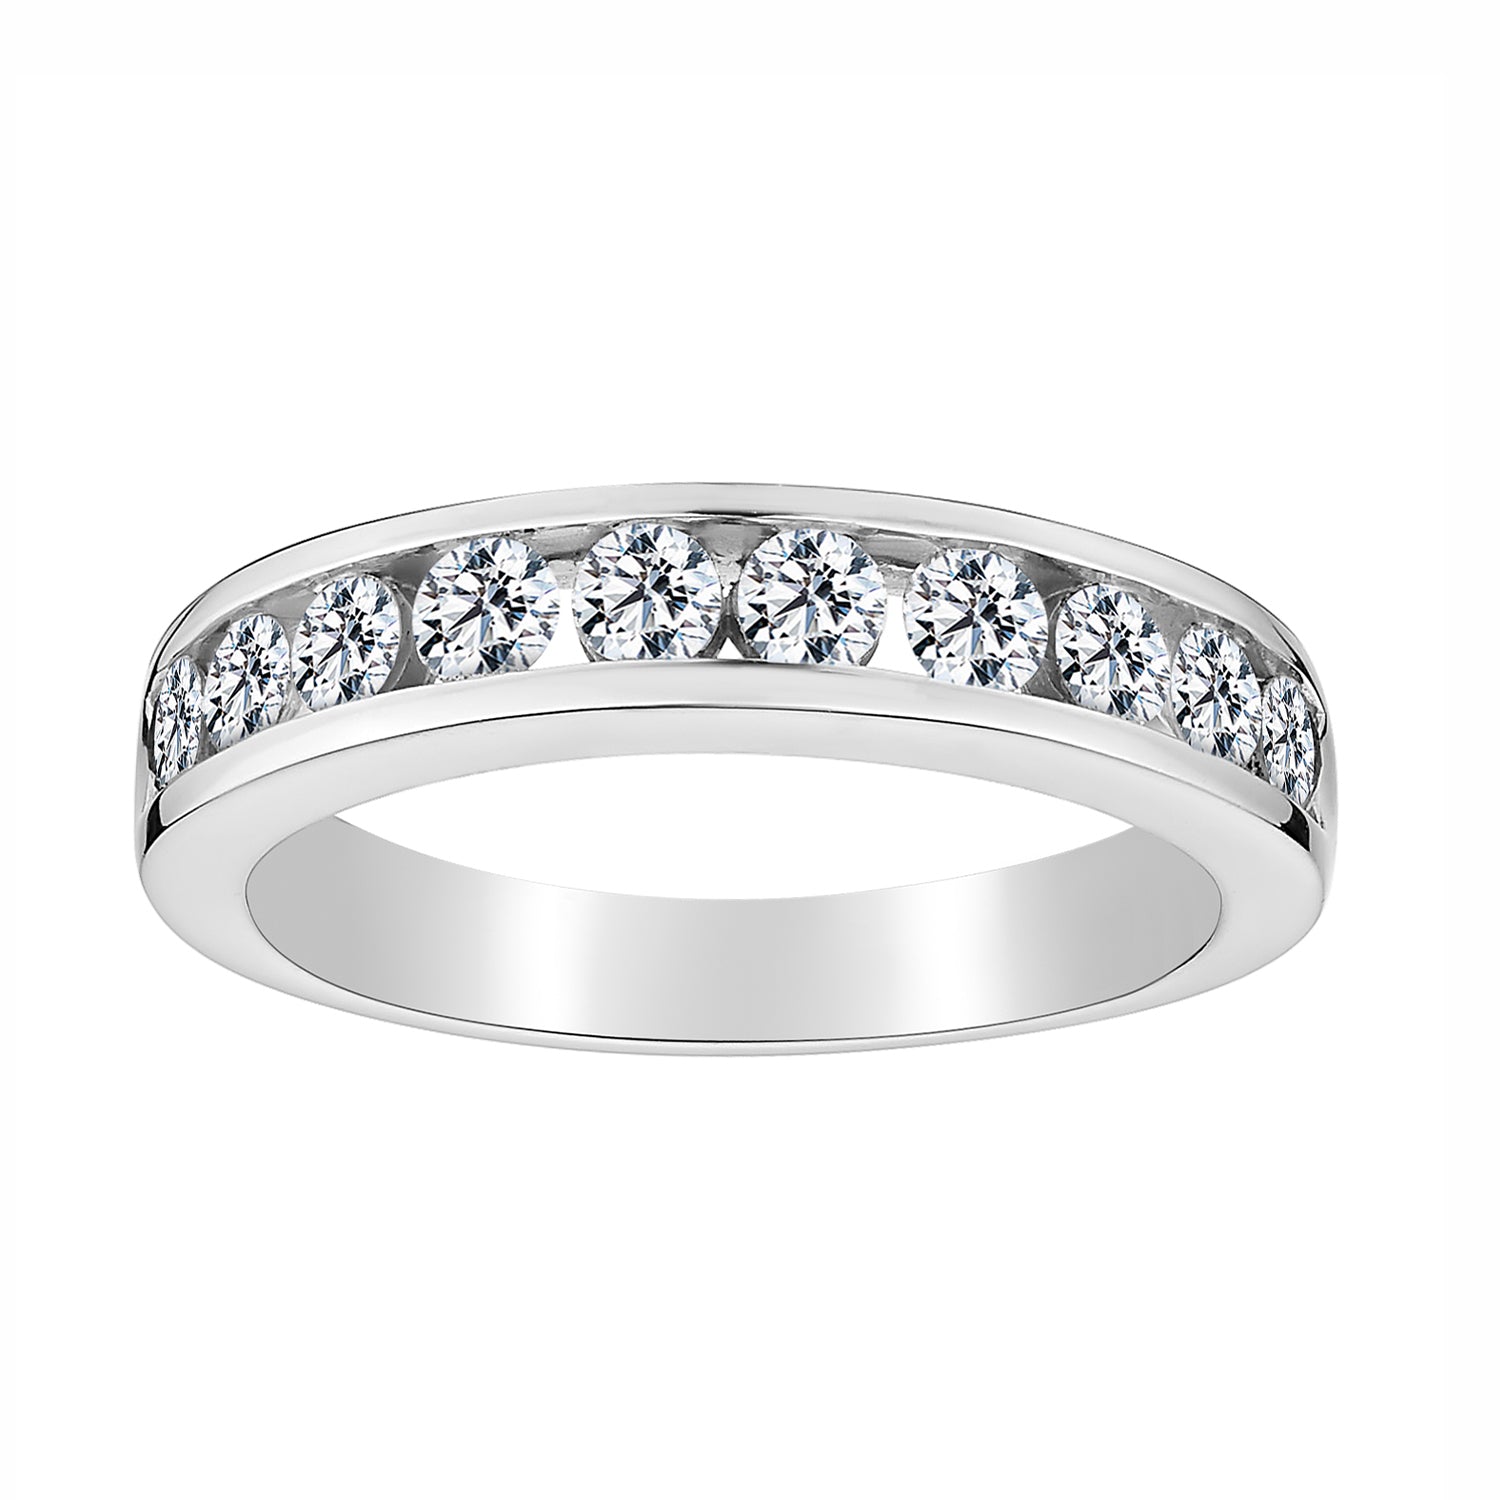 .75 Carat of Diamonds Ring Band, 10kt White Gold...................NOW